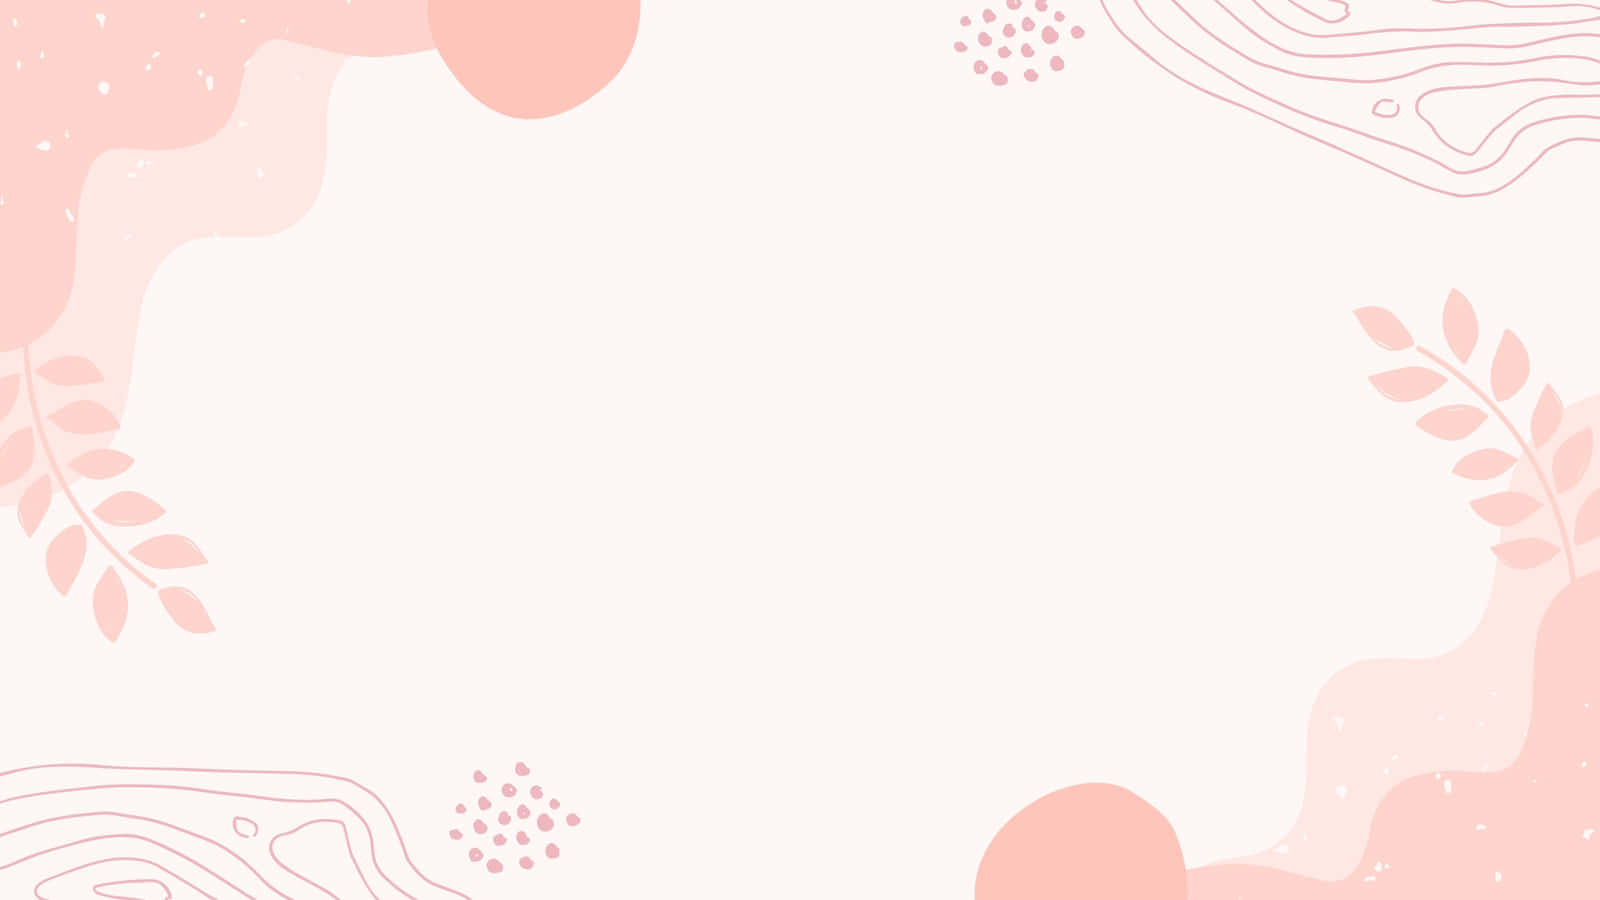 Download A bright and simple pink background | Wallpapers.com